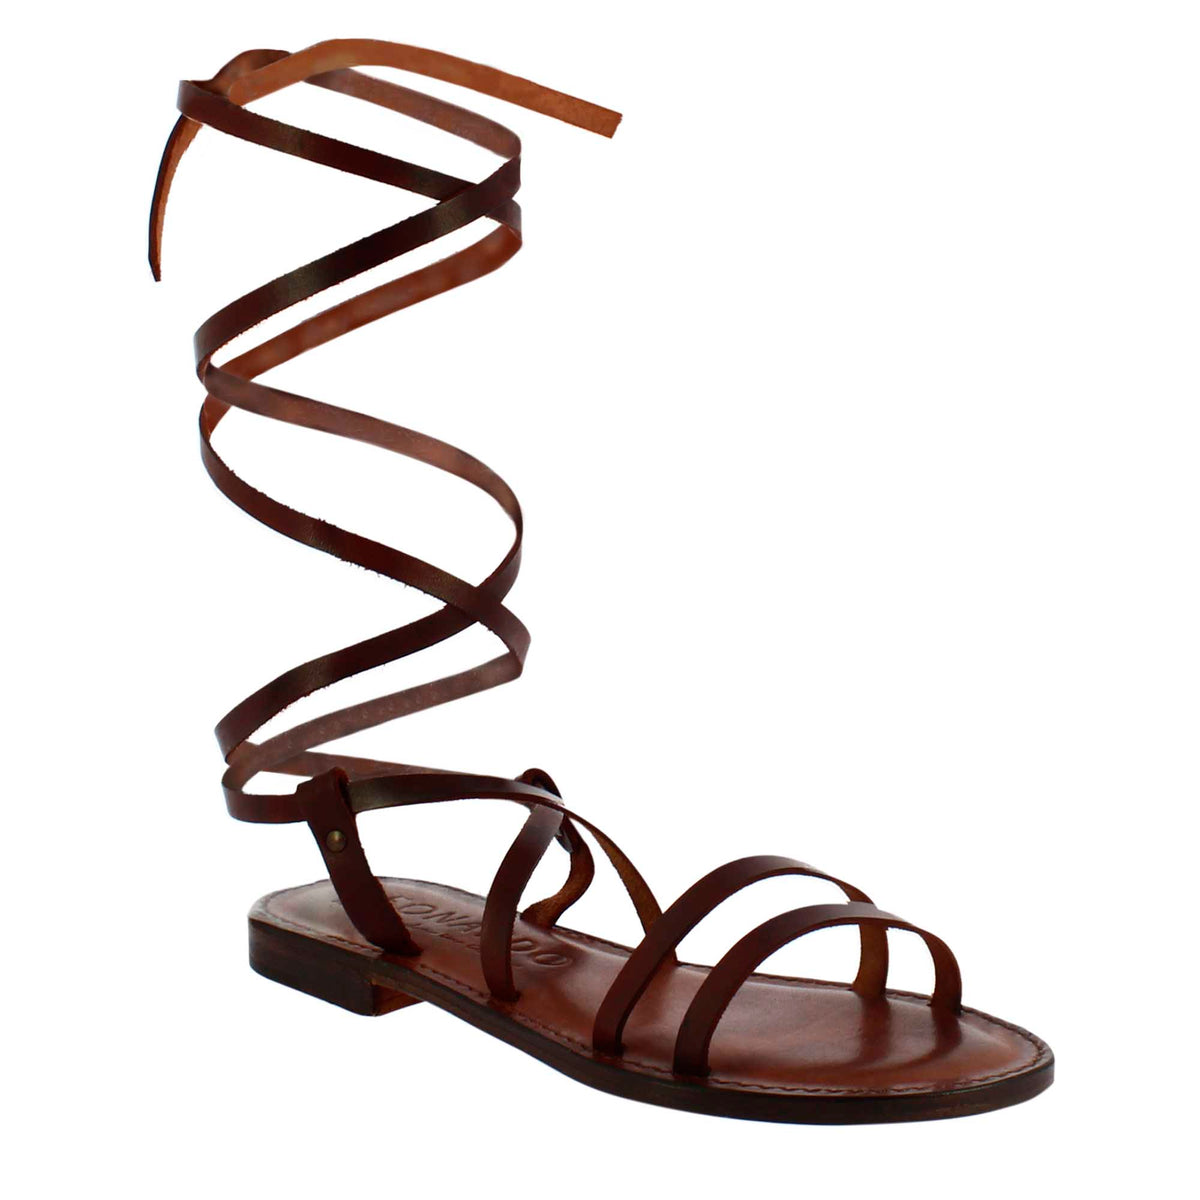 Ancient Roman style women's Lumina sandals in brown leather 